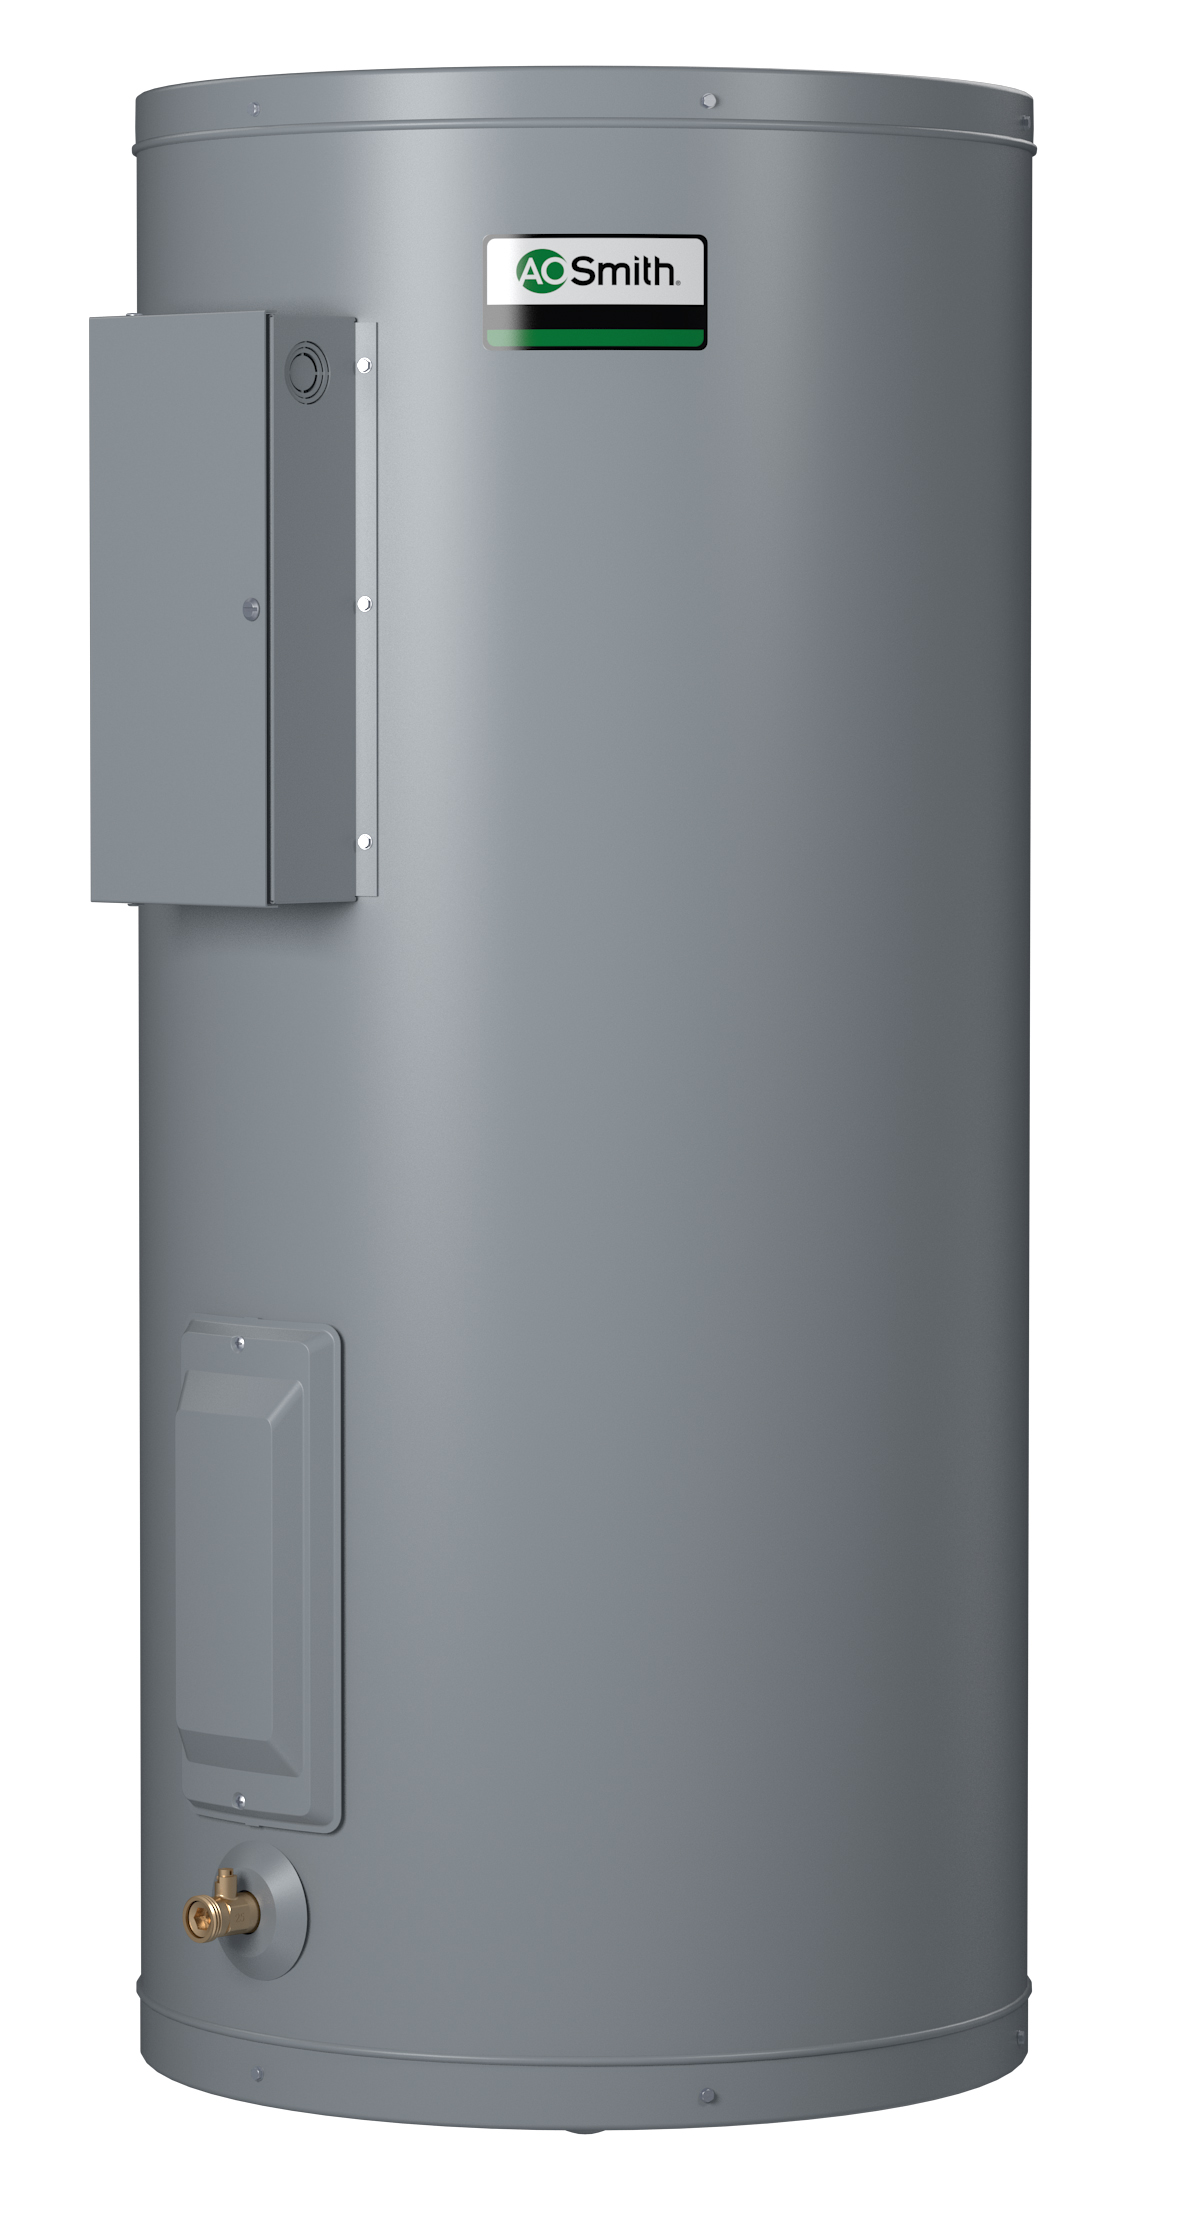 AO SMITH DEL-15S: 15 GALLONS, 4.0KW, 480 VOLT, 8.33 AMPS, 1 PHASE, SINGLE ELEMENT, LIGHT DUTY COMMERCIAL ELECTRIC WATER HEATER, DURA-POWER